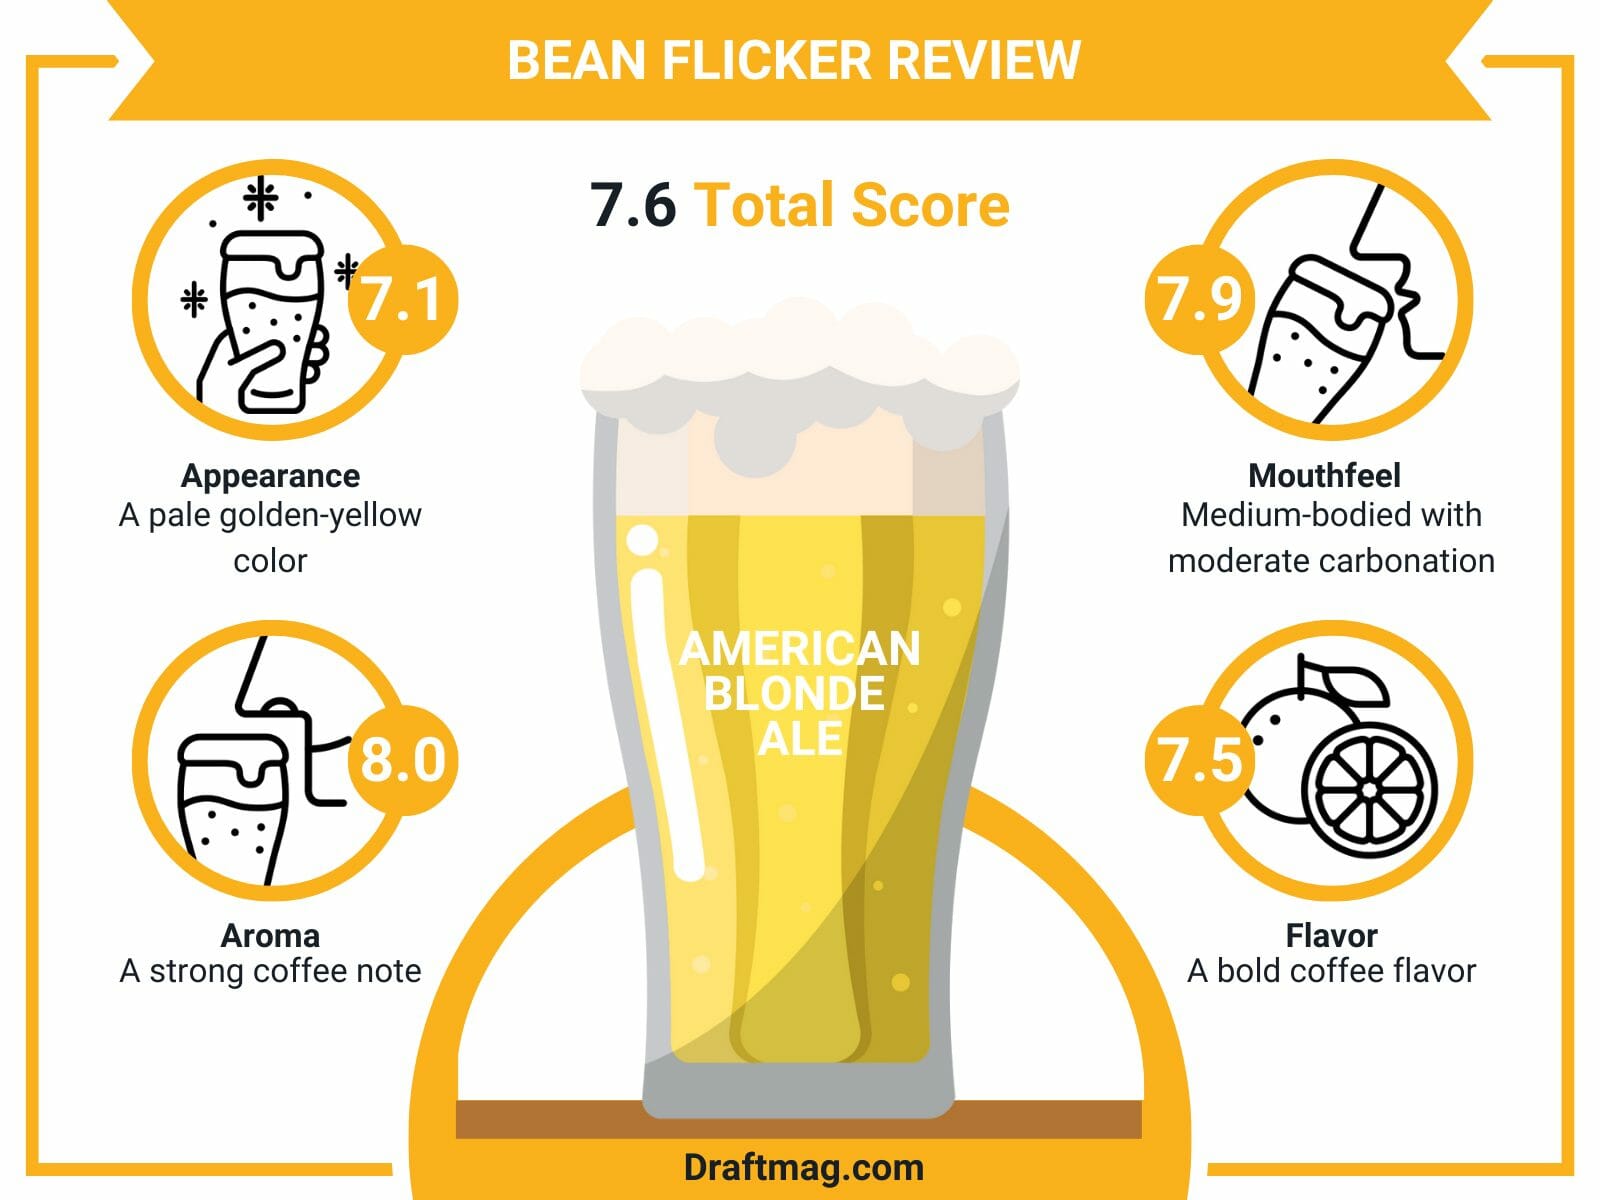 Bean flicker review infographic